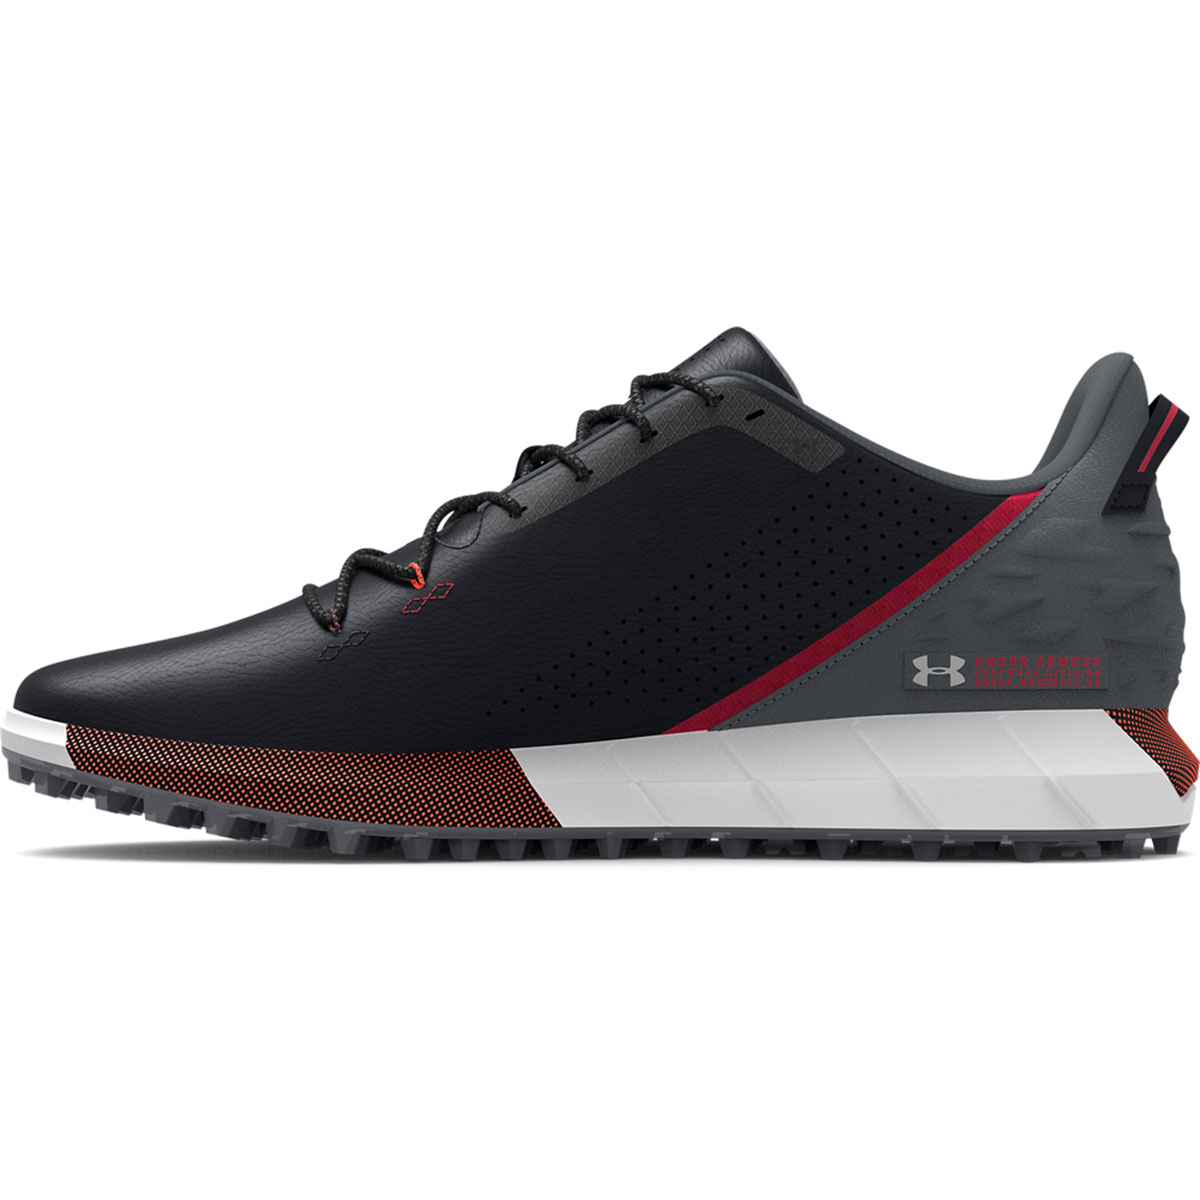 Under Armour Men's HOVR Drive Waterproof Spikeless Golf Shoes from american golf